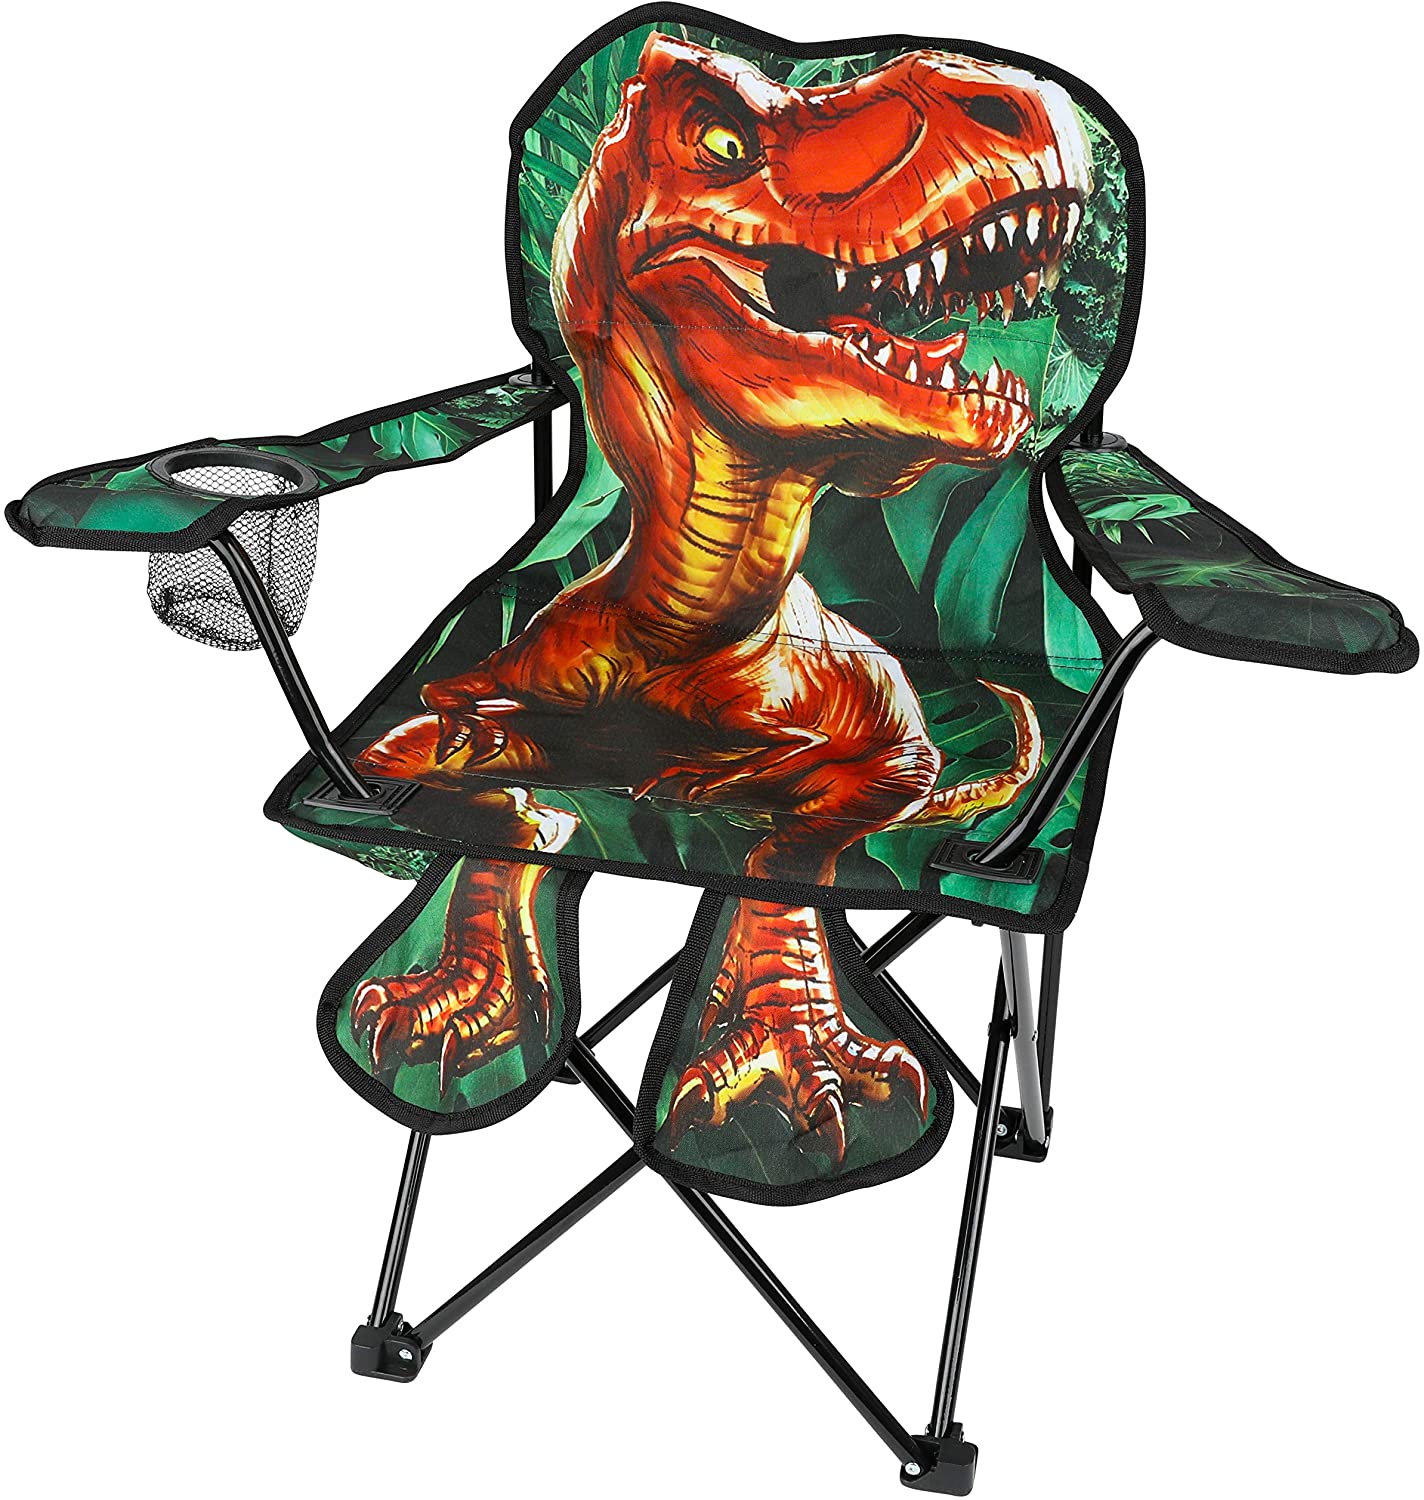 Toy To Enjoy Outdoor Dinosaur Chair for Kids – Foldable Children’s Chair for Camping, Tailgates, Beach, – Carrying Bag Included Mesh Cup Holder & Sturdy Construction. Available for Ages 2 to 5 & 5-10